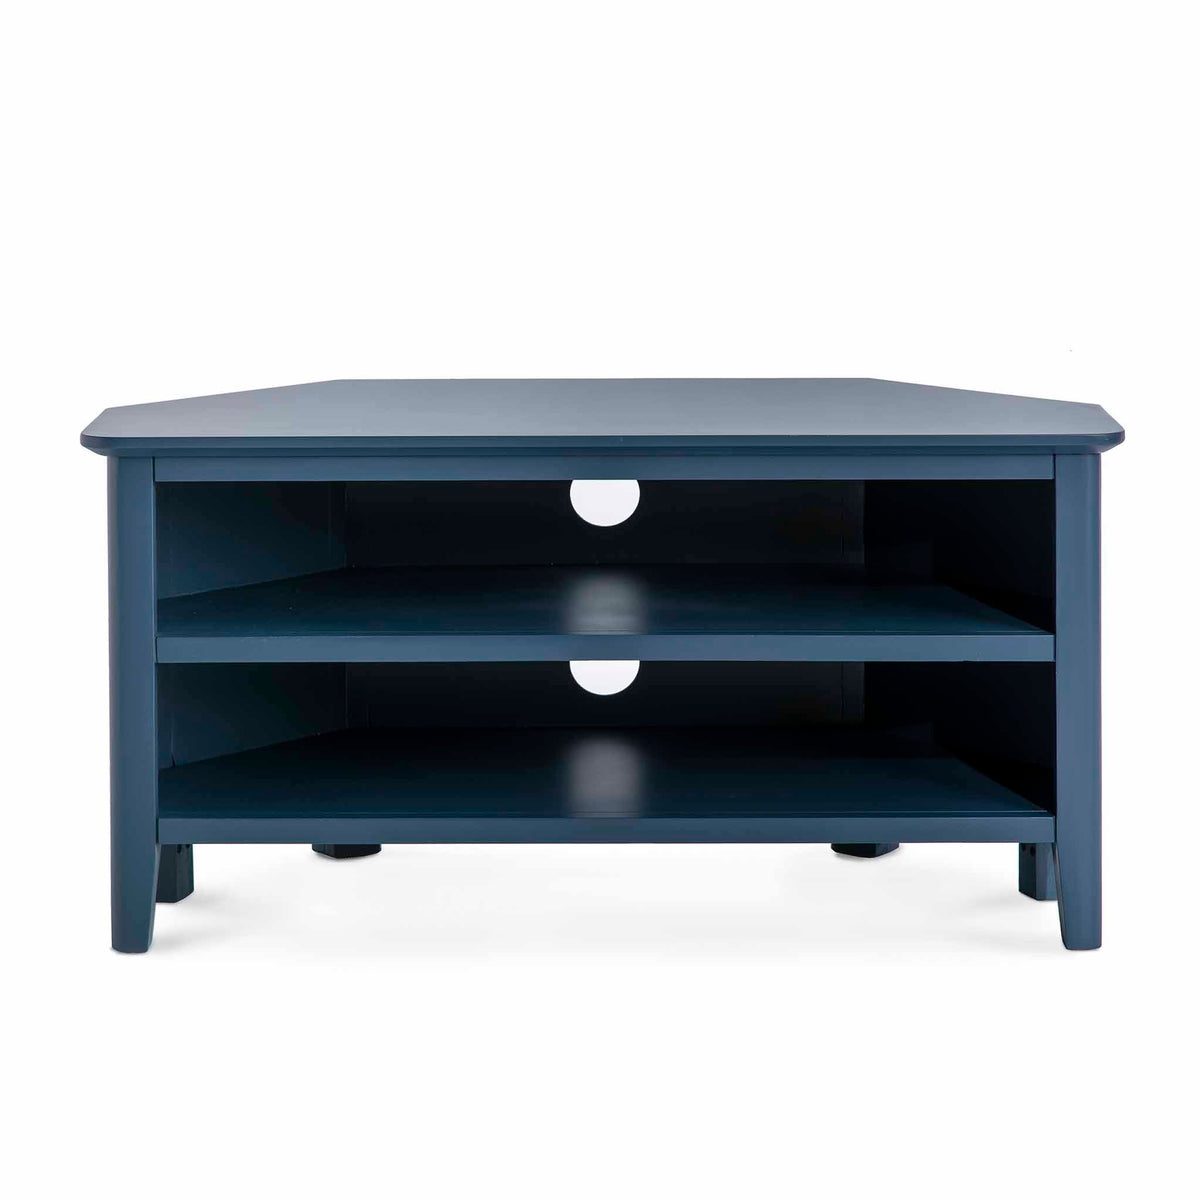 Stirling Blue Corner TV Stand - Front view